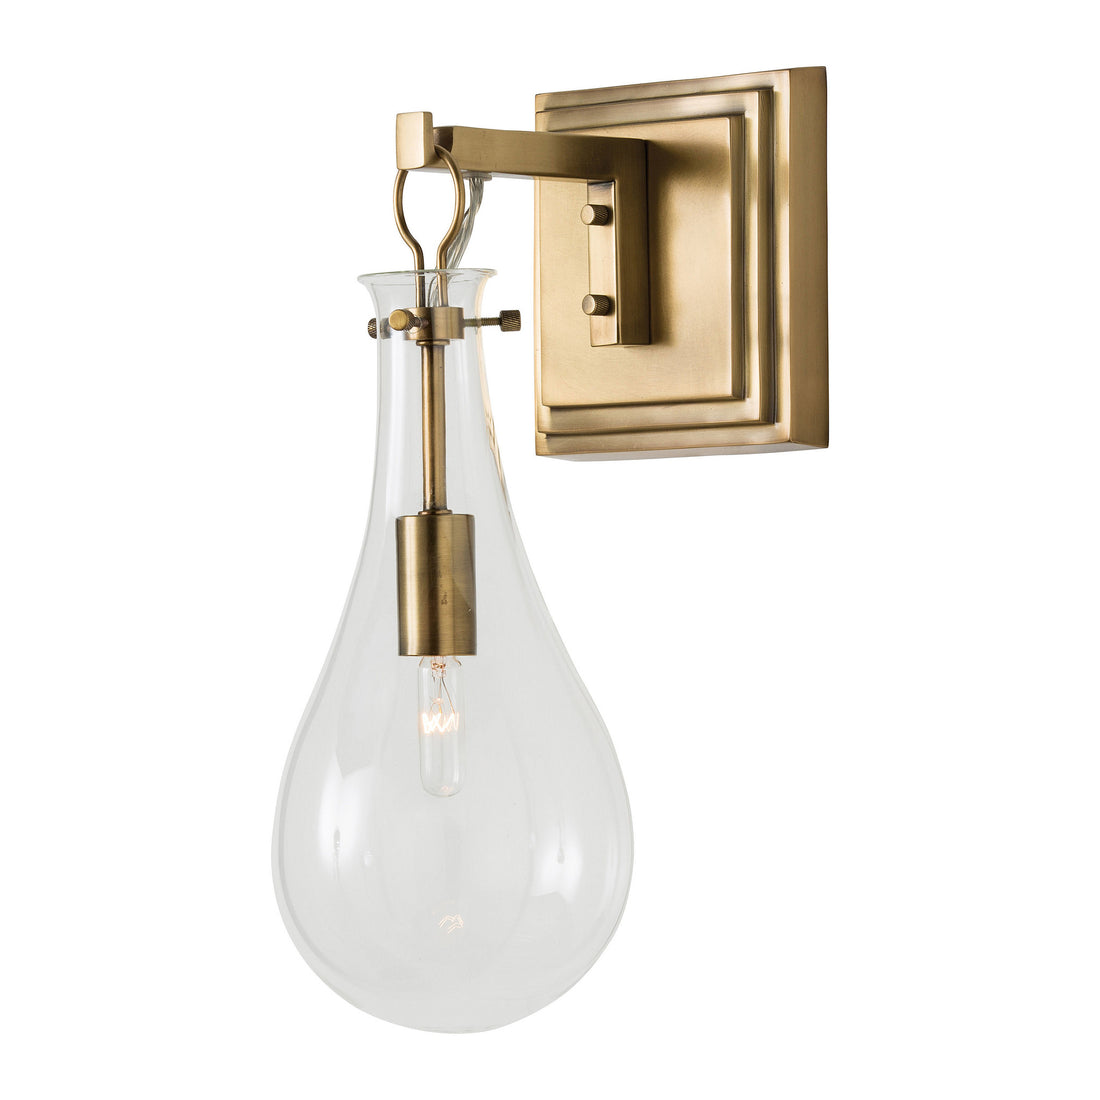 Sabine Wall Sconce in Antique Brass by Arteriors Home 49986